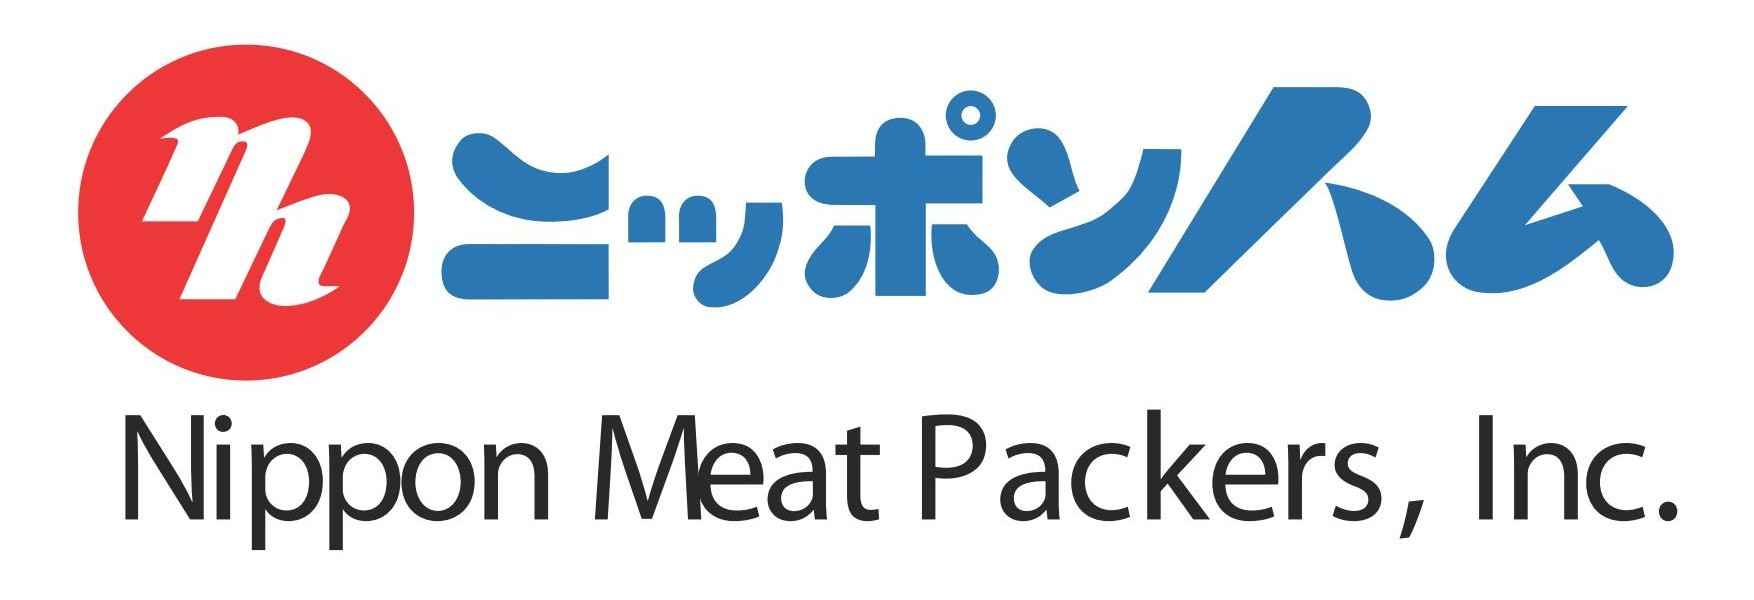 Nippon Meat Packers Logo png